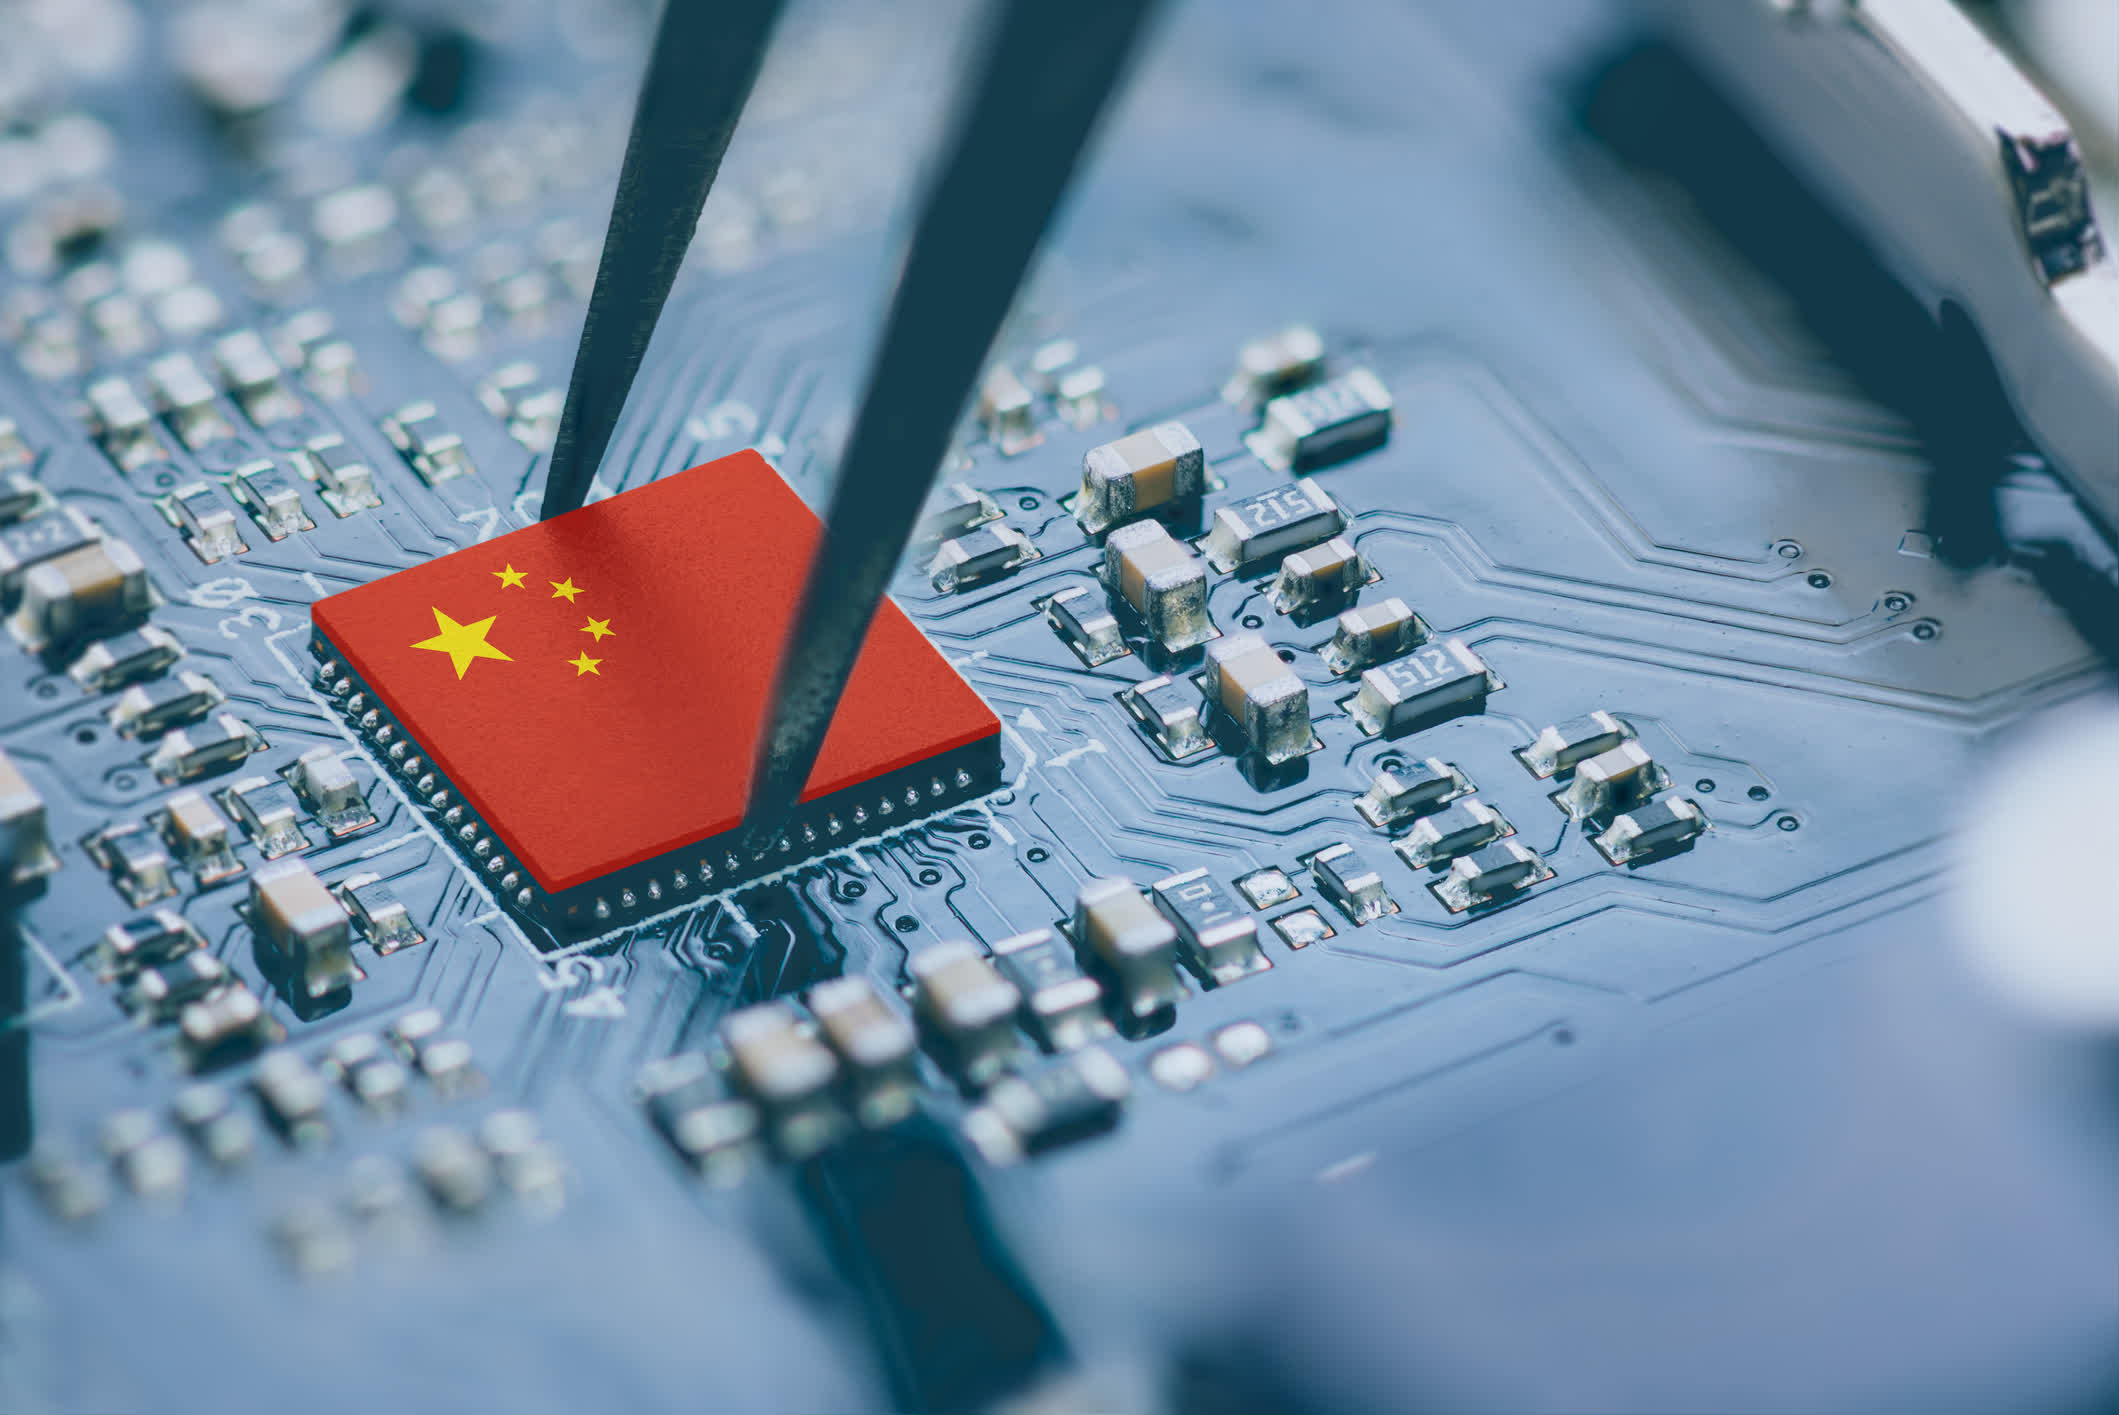 Chinese companies are filling warehouses with chipmaking equipment in preparation for more restrictions